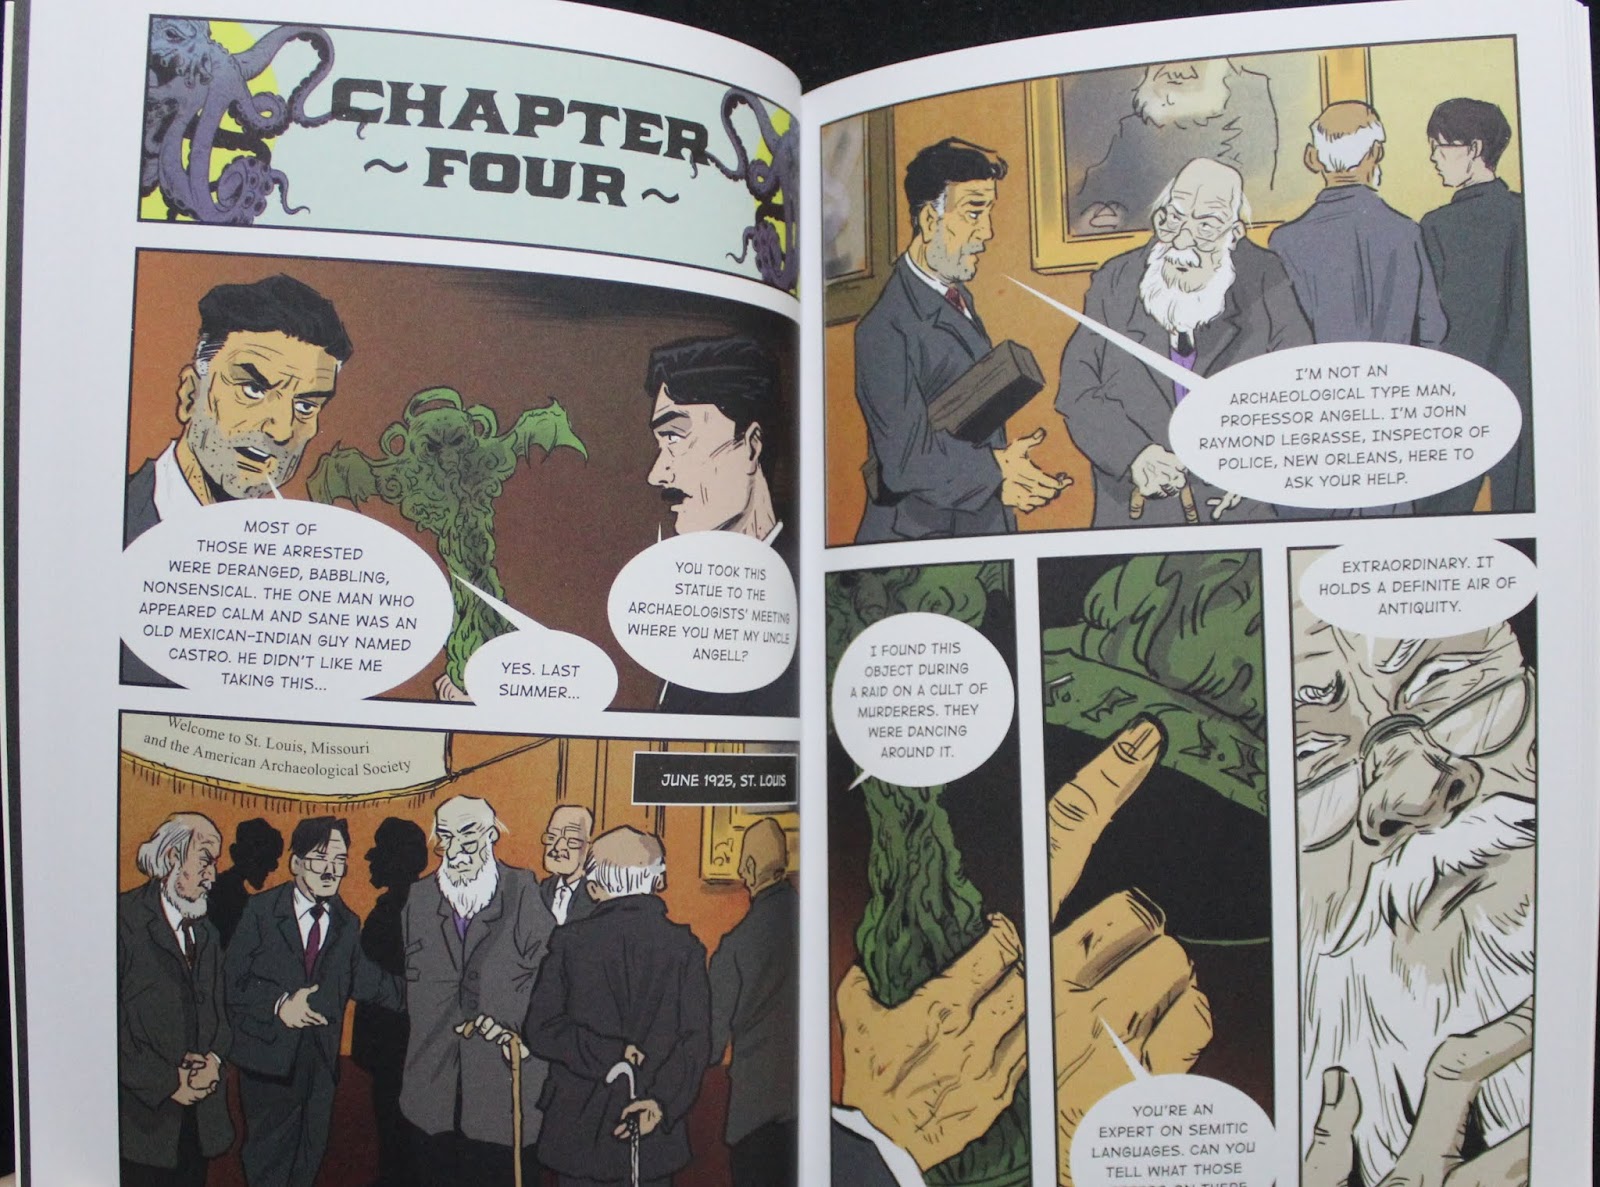 Susurros desde la Oscuridad: The Call of Cthulhu: A Graphic Novel